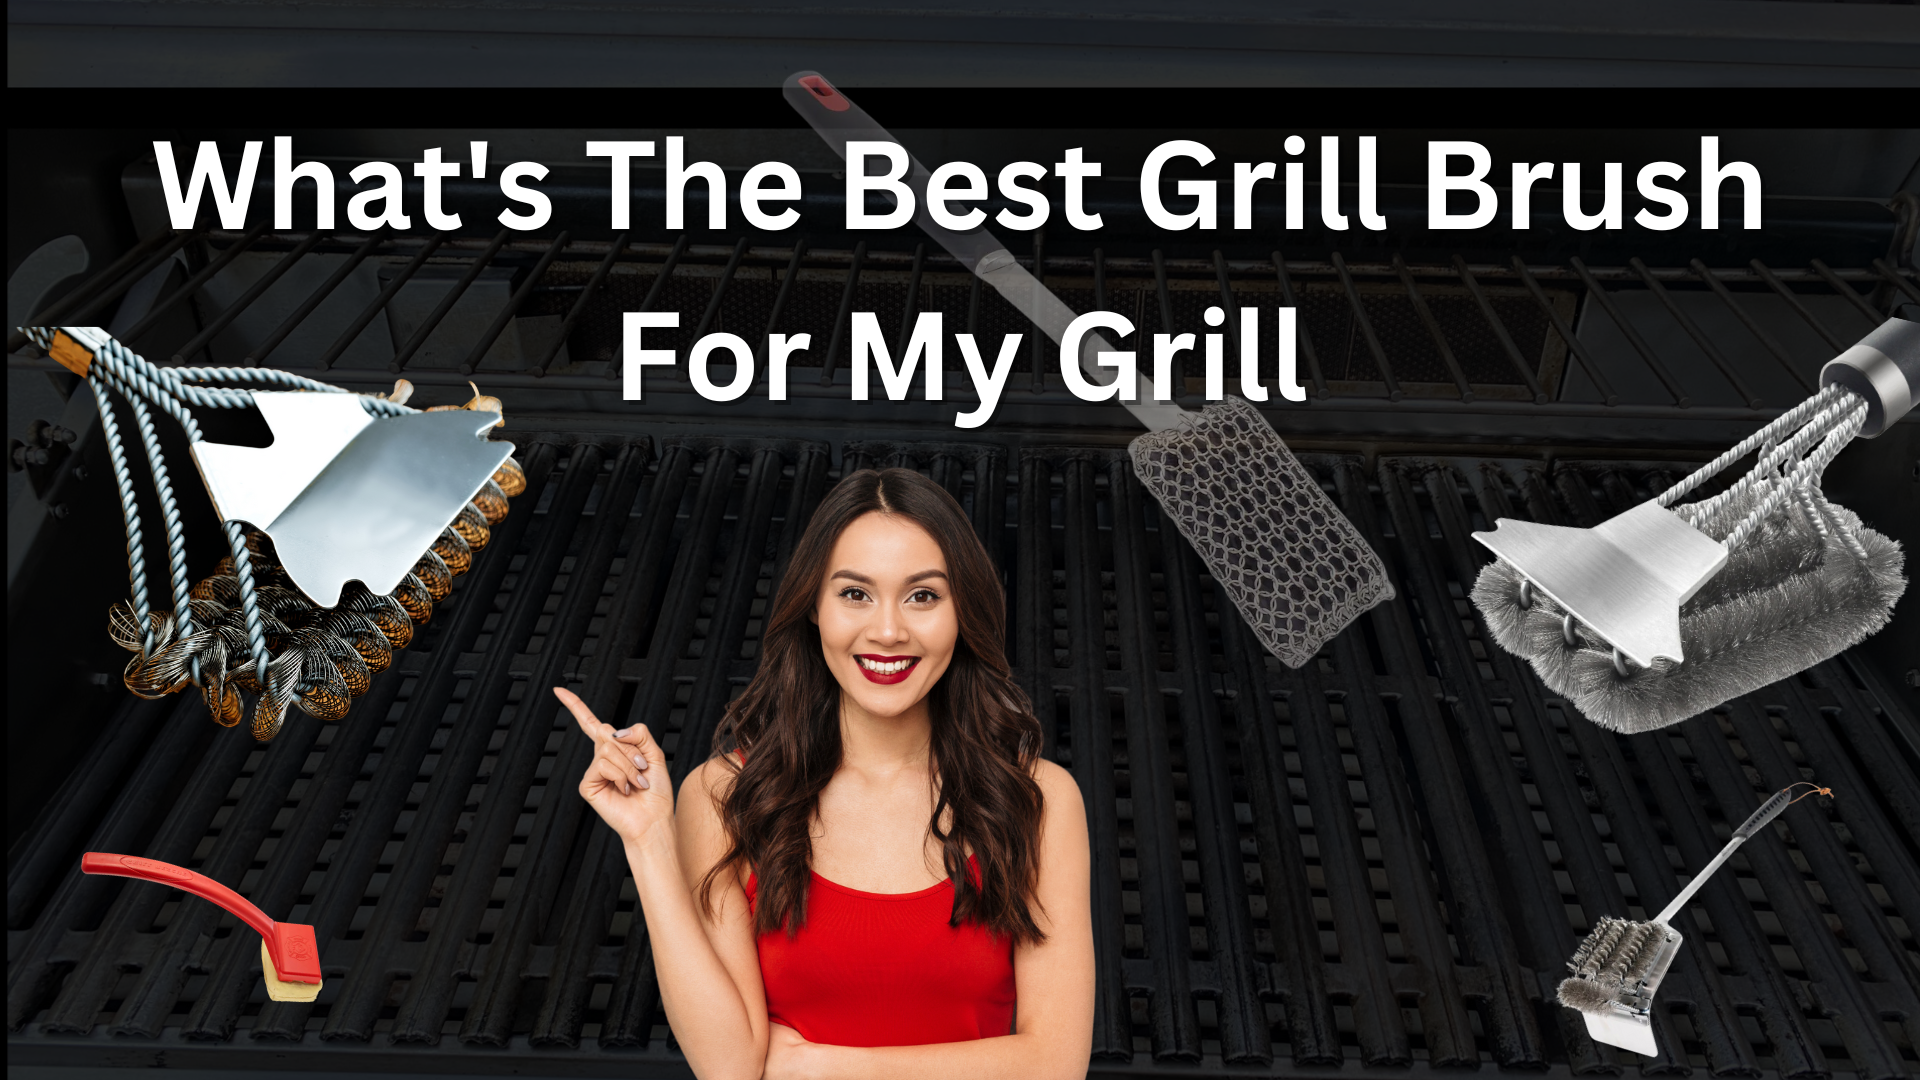 Best Grill Brush For My Grill